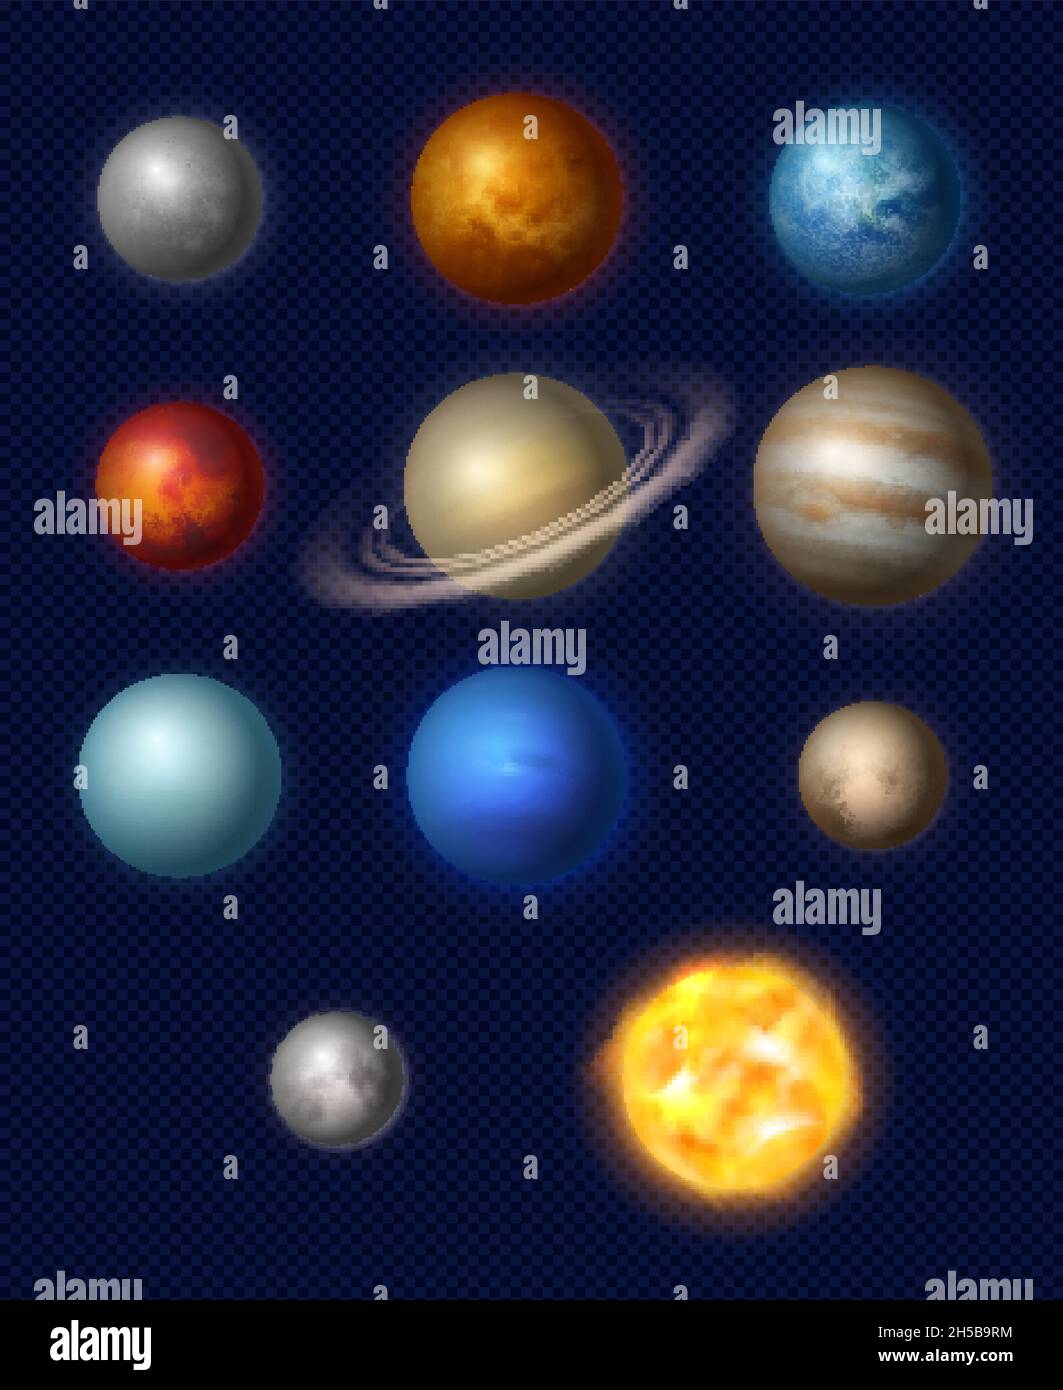 Planets realistic. Universe systems stars collection jupiter earth moon neptune various size of planets decent vector astronomy illustrations Stock Vector